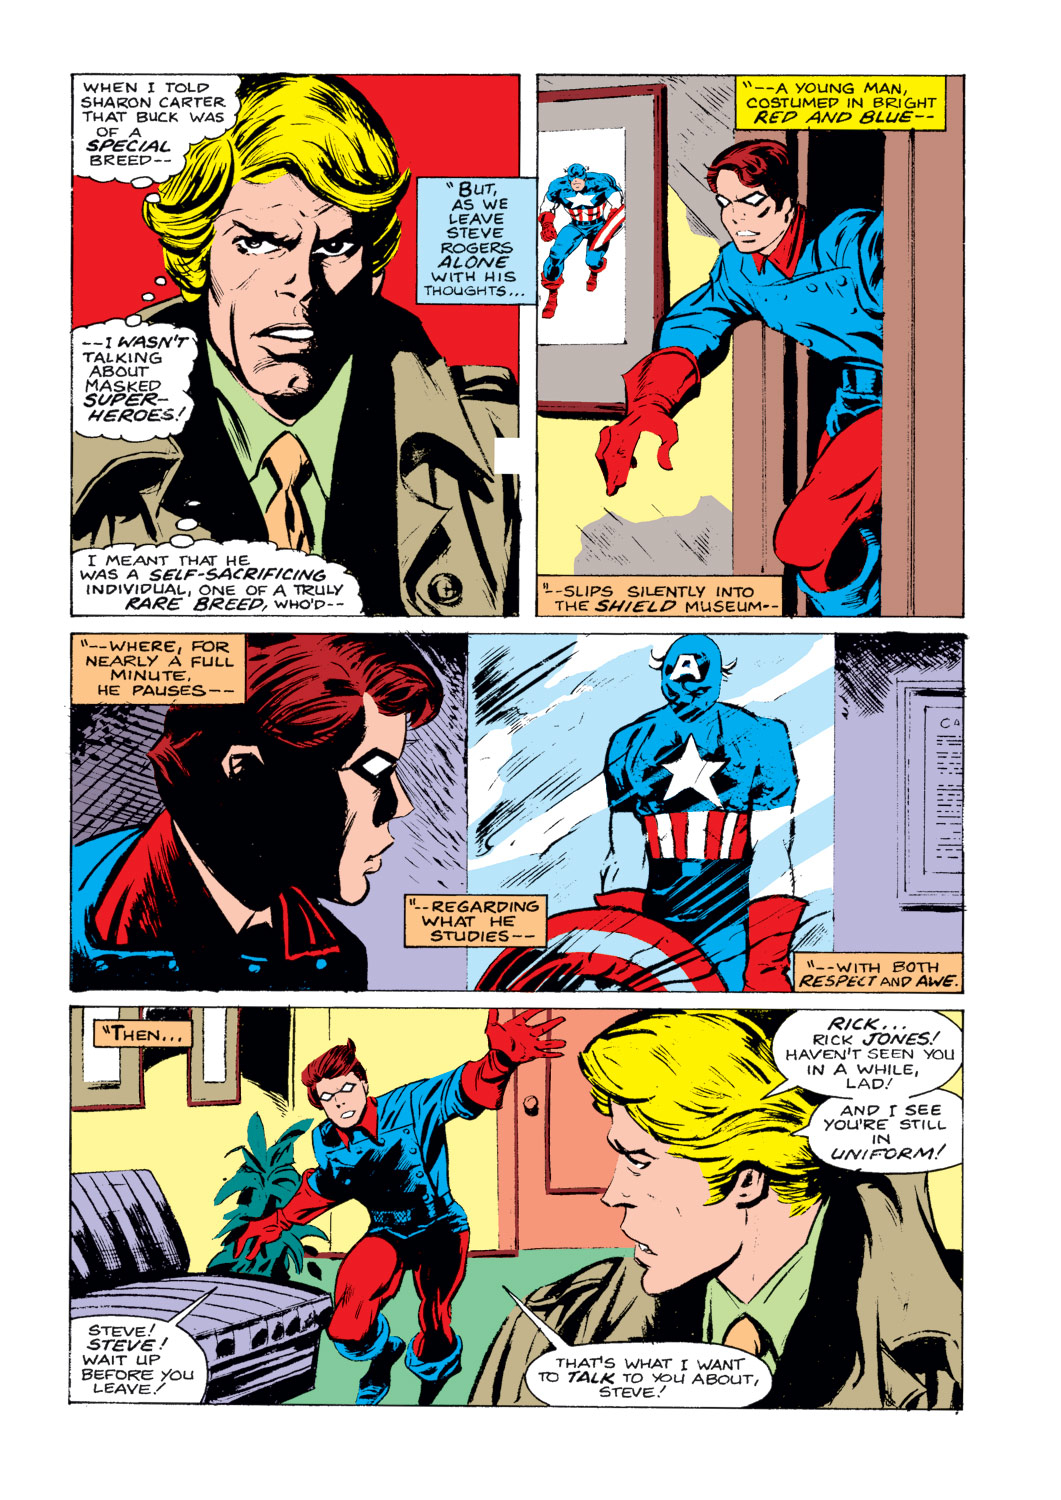 What If? (1977) issue 5 - Captain America hadn't vanished during World War Two - Page 33